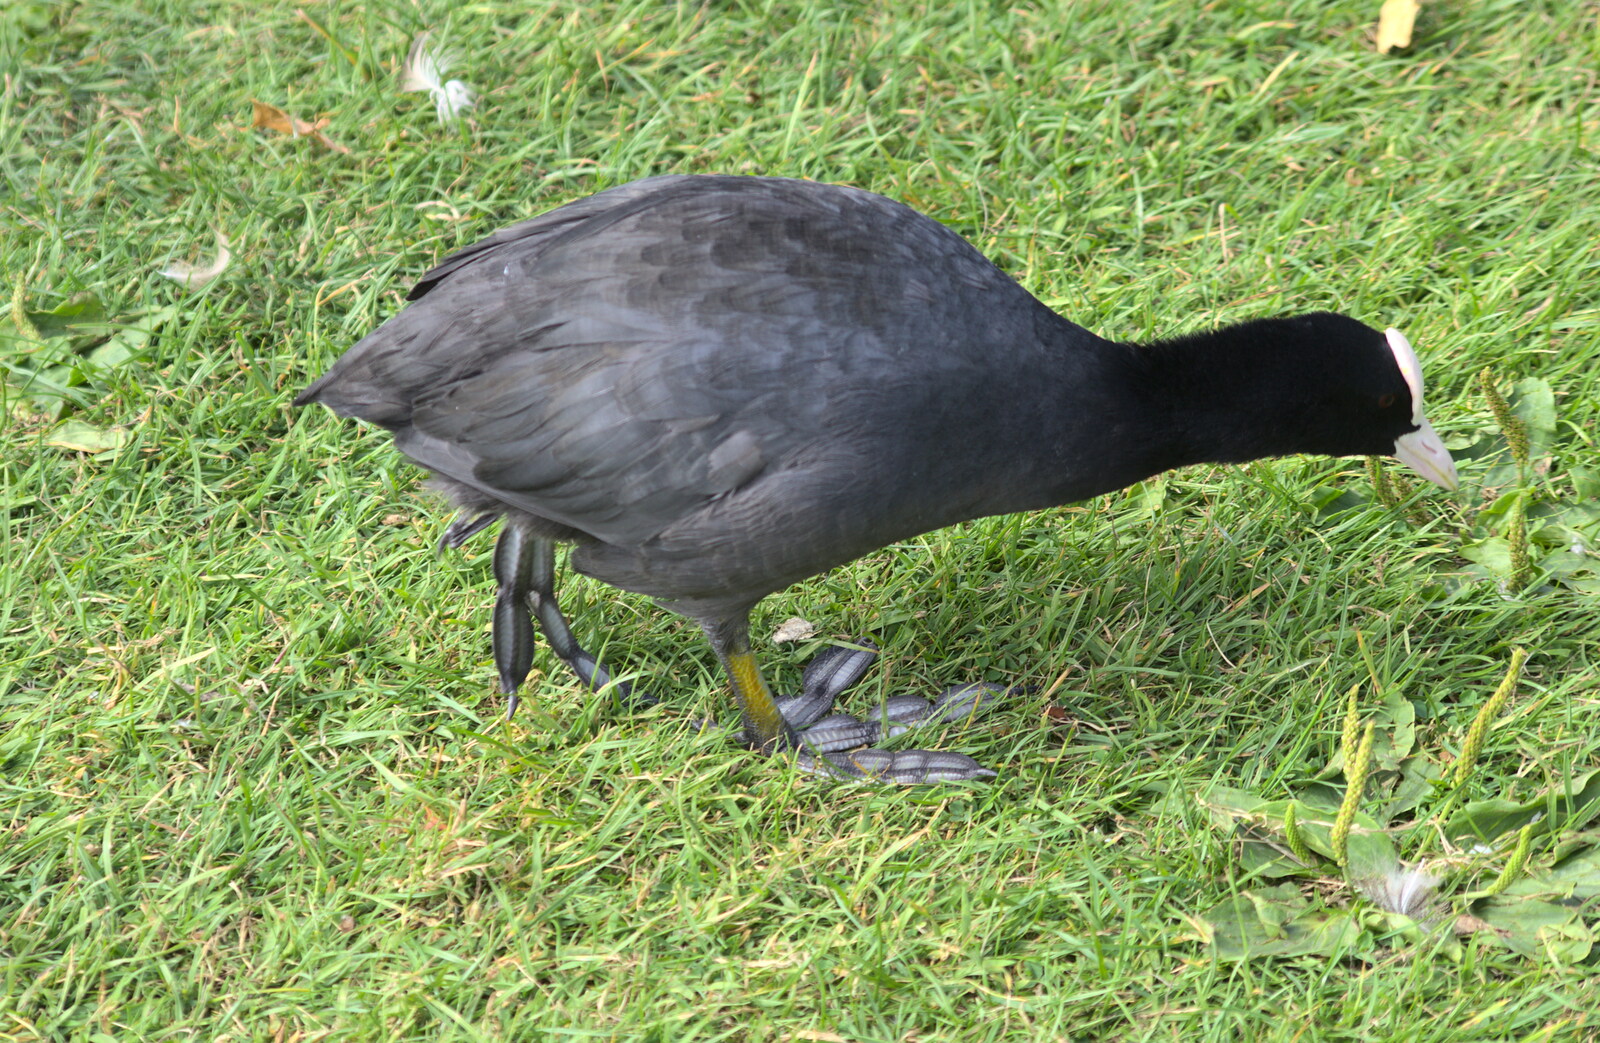 A moorhen shows off its absurd feet from Diss Fest, The Park, Diss, Norfolk - 22nd July 2018